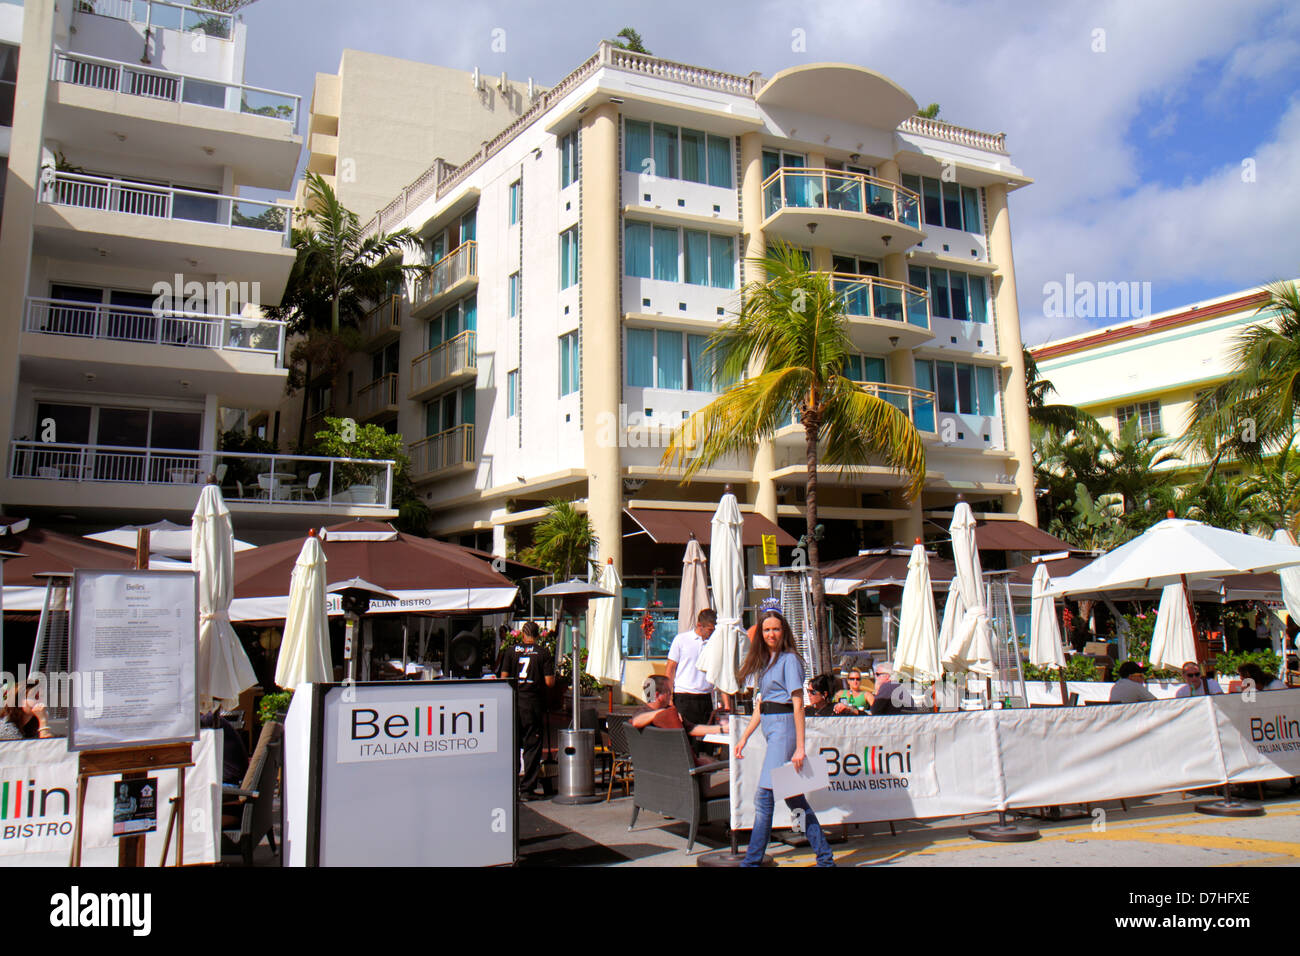 Miami Beach Florida,Ocean Drive,hotels,restaurant restaurants food dining eating out cafe cafes bistro,al fresco sidewalk outside open air tables,dini Stock Photo